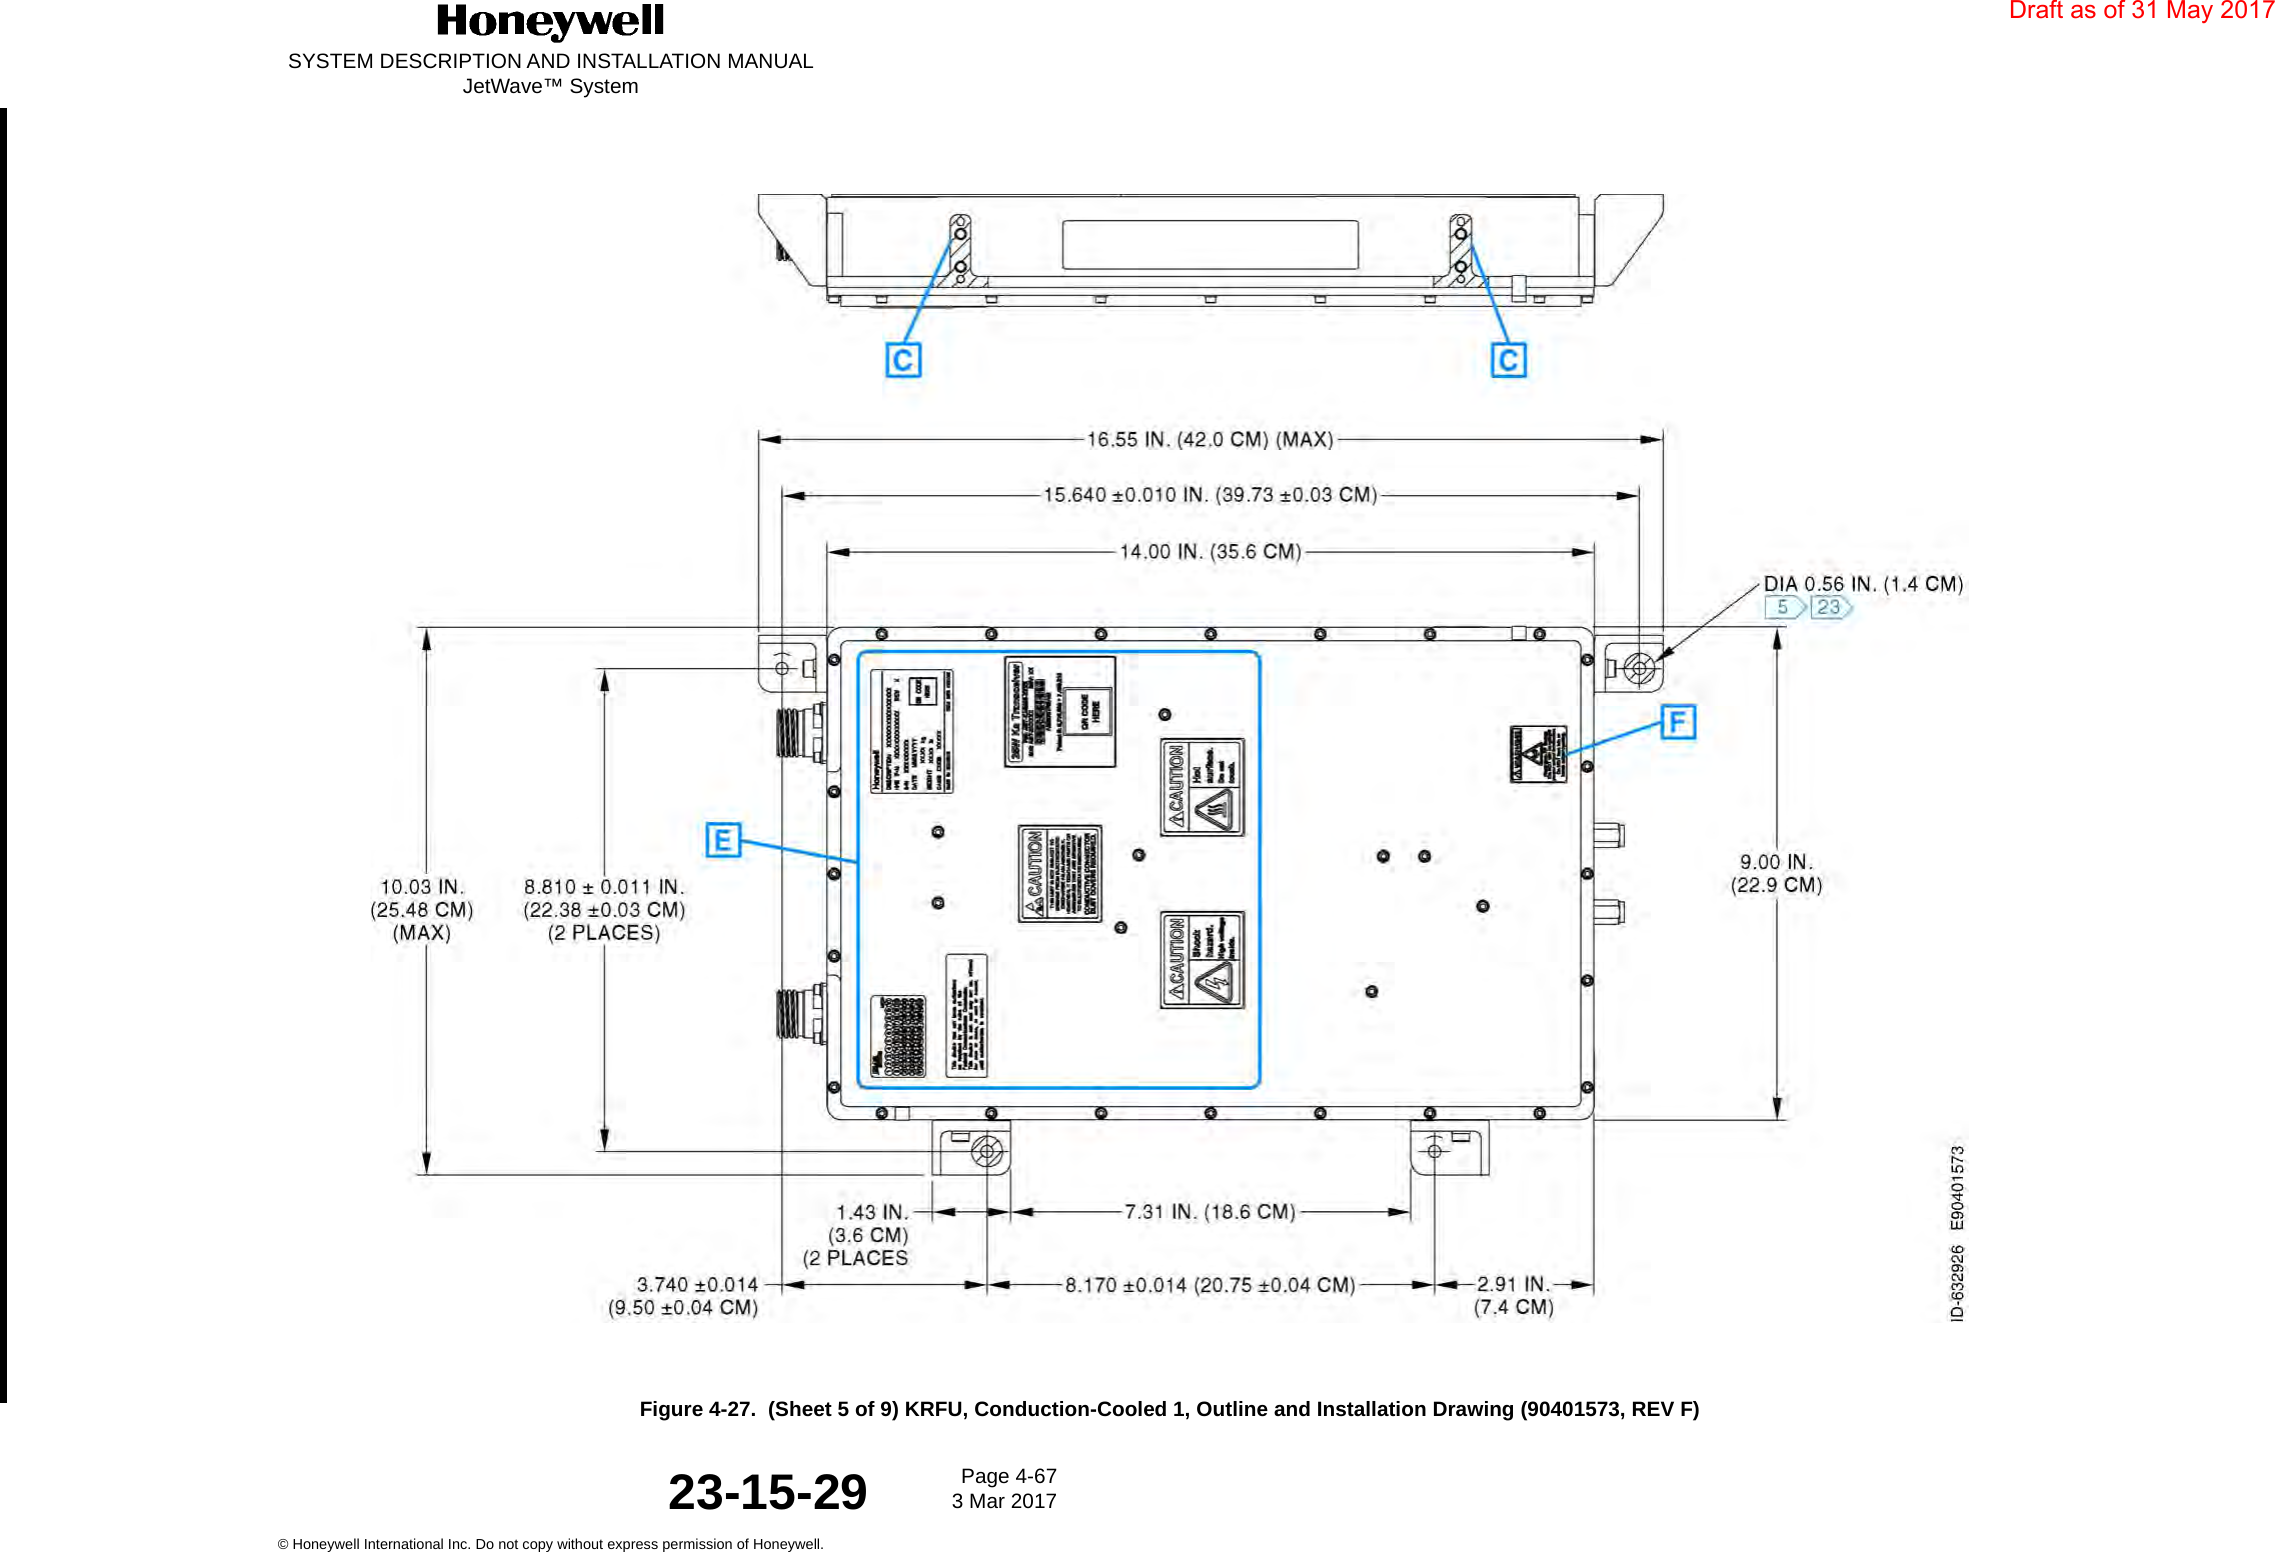 SYSTEM DESCRIPTION AND INSTALLATION MANUALJetWave™ SystemPage 4-67 3 Mar 2017© Honeywell International Inc. Do not copy without express permission of Honeywell.23-15-29Figure 4-27.  (Sheet 5 of 9) KRFU, Conduction-Cooled 1, Outline and Installation Drawing (90401573, REV F)Draft as of 31 May 2017